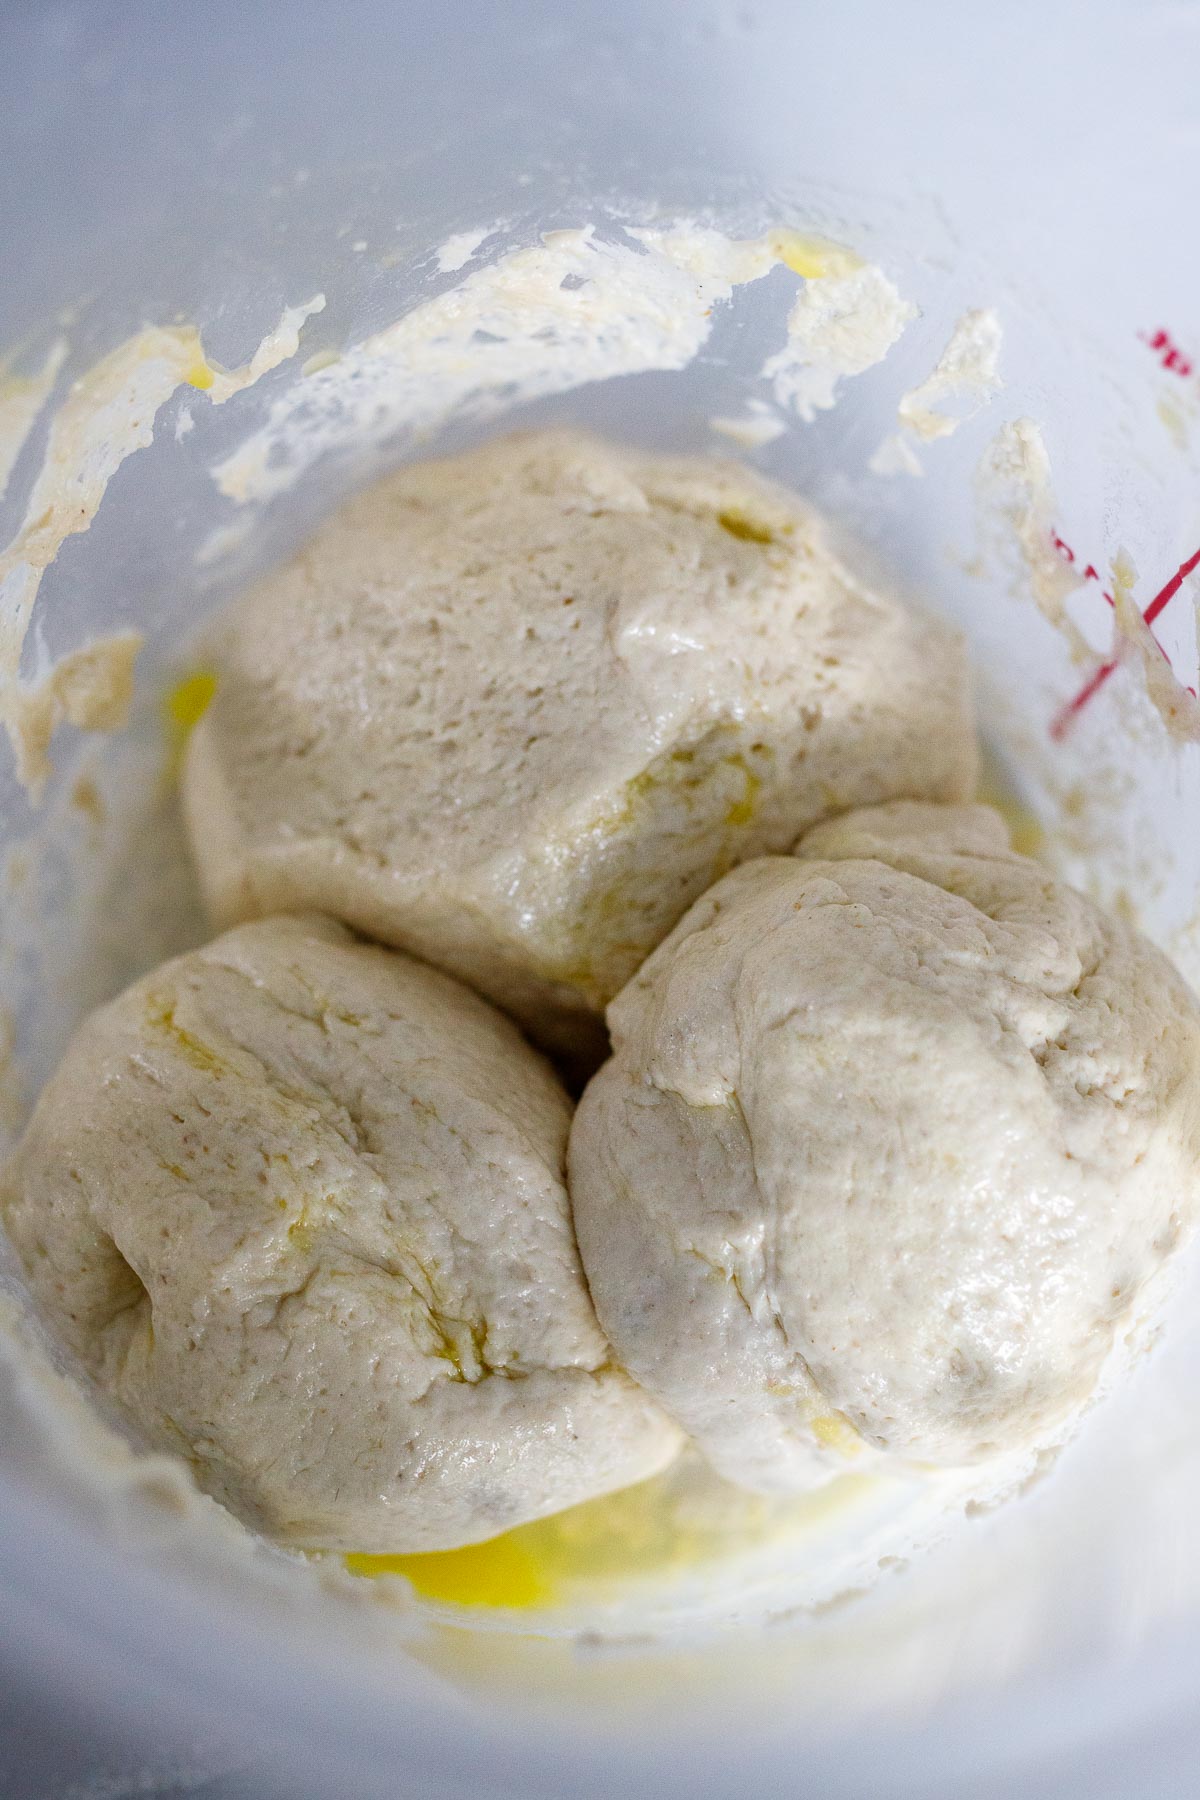 Storing 3 balls of dough in the container to use later. 